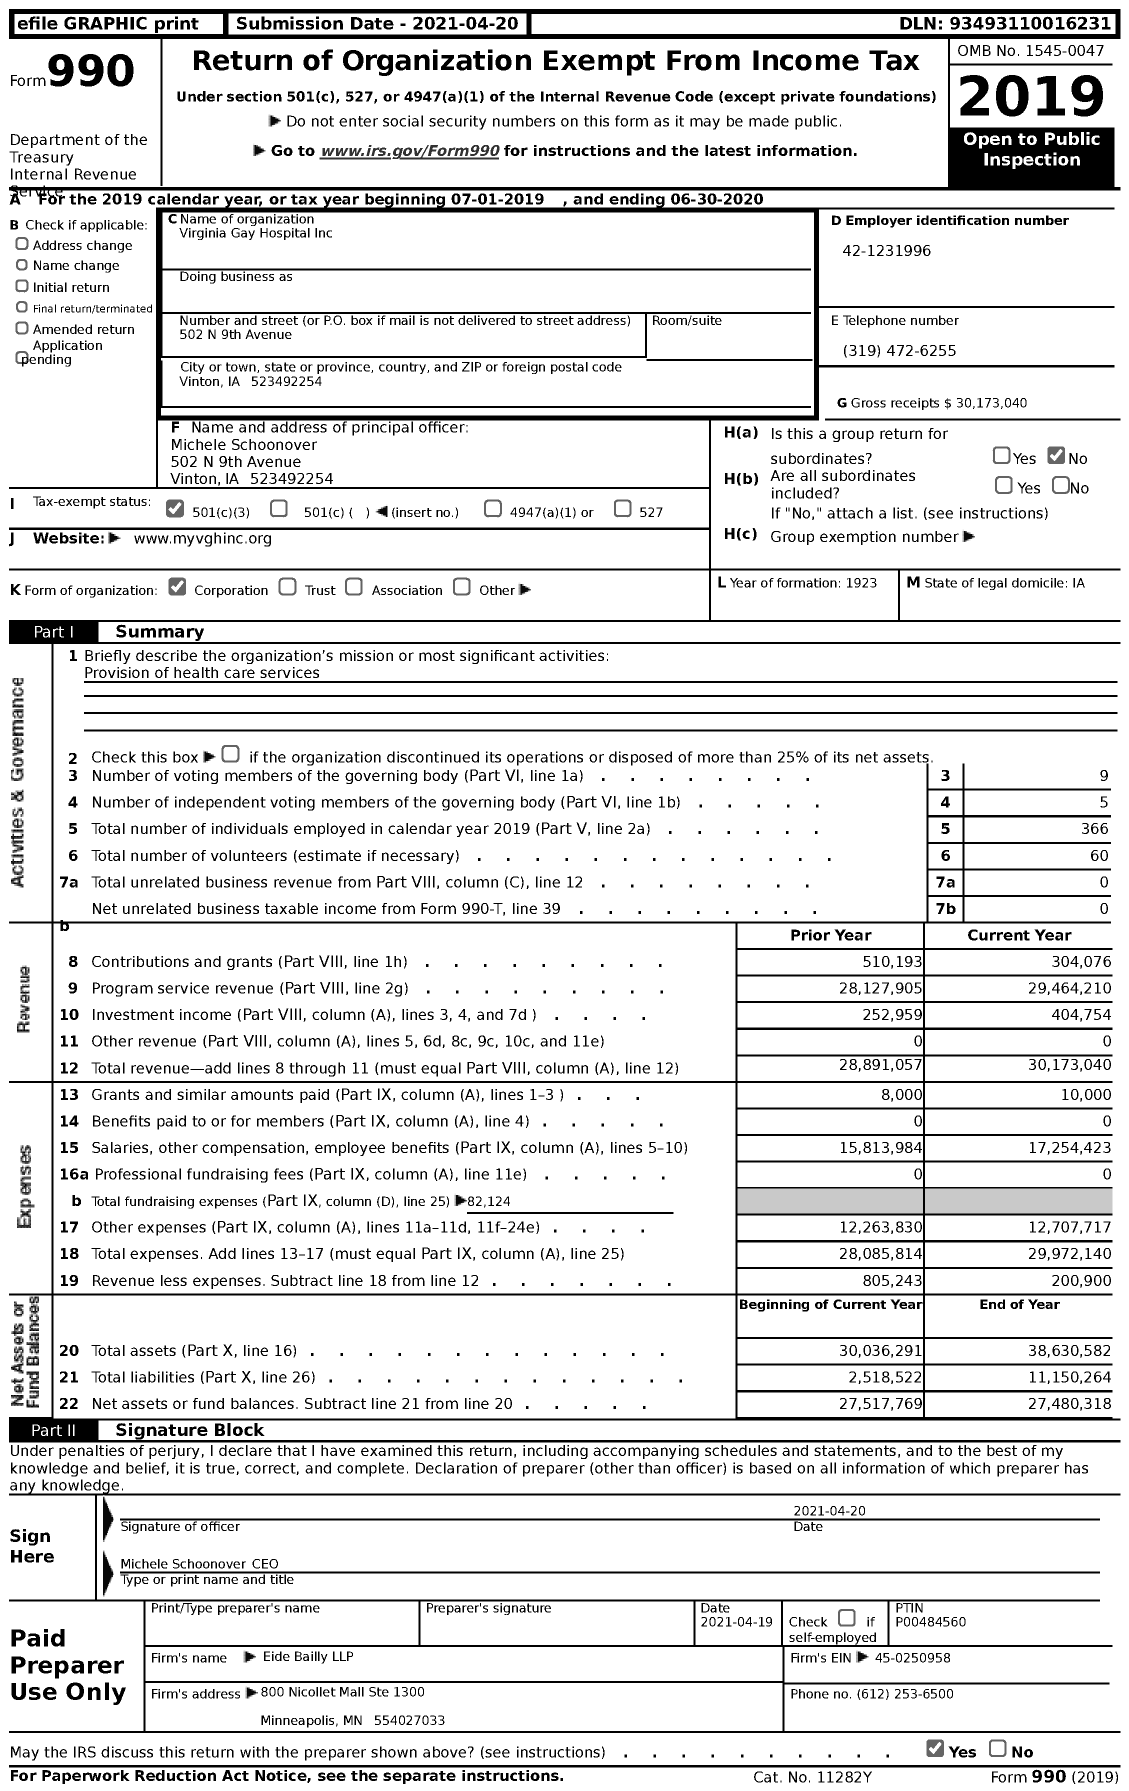 Image of first page of 2019 Form 990 for Virginia Gay Hospital (VGH)